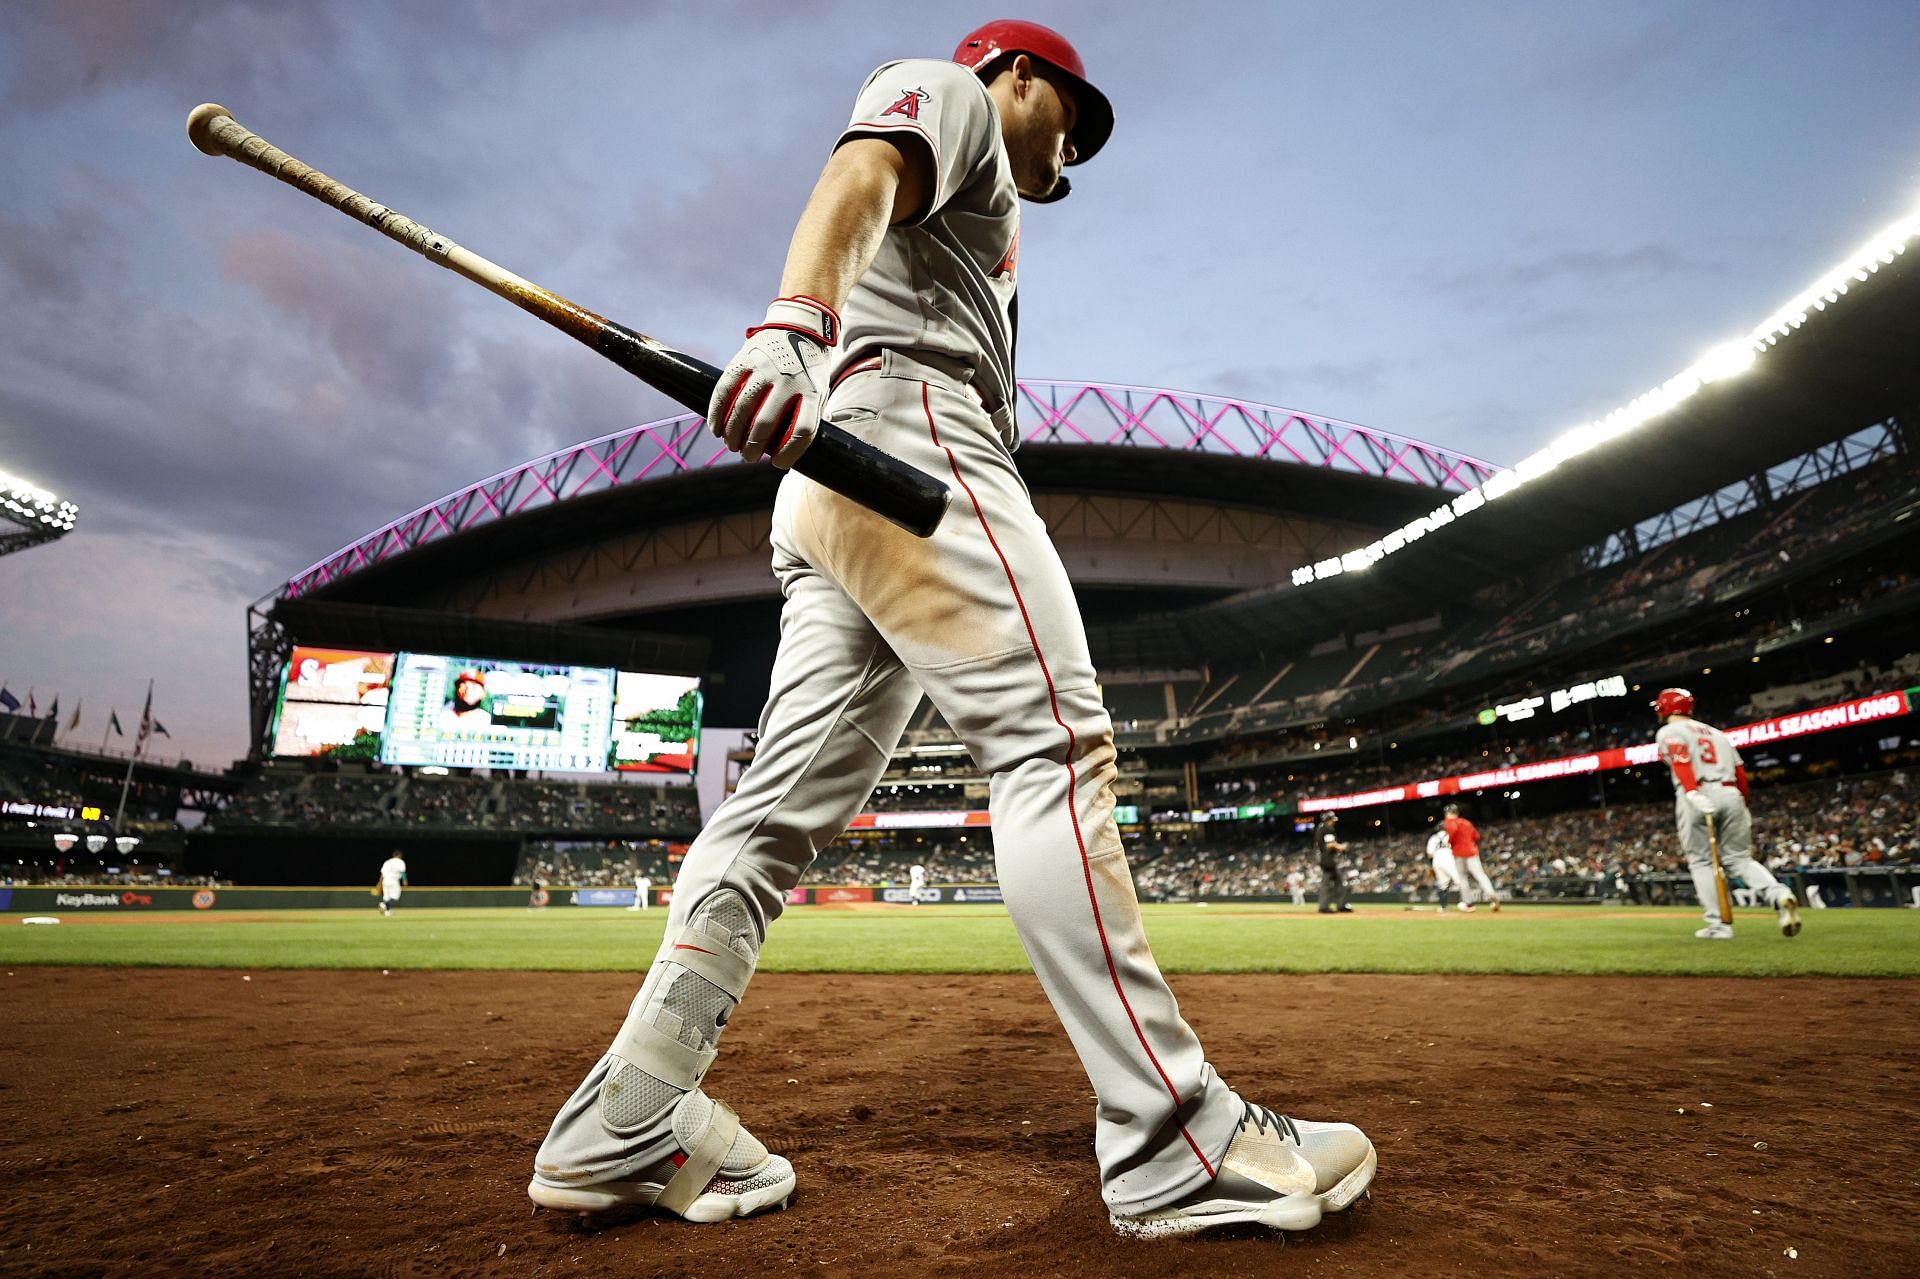 Mike Trout has 30 home runs in 85 games played in Seattle.